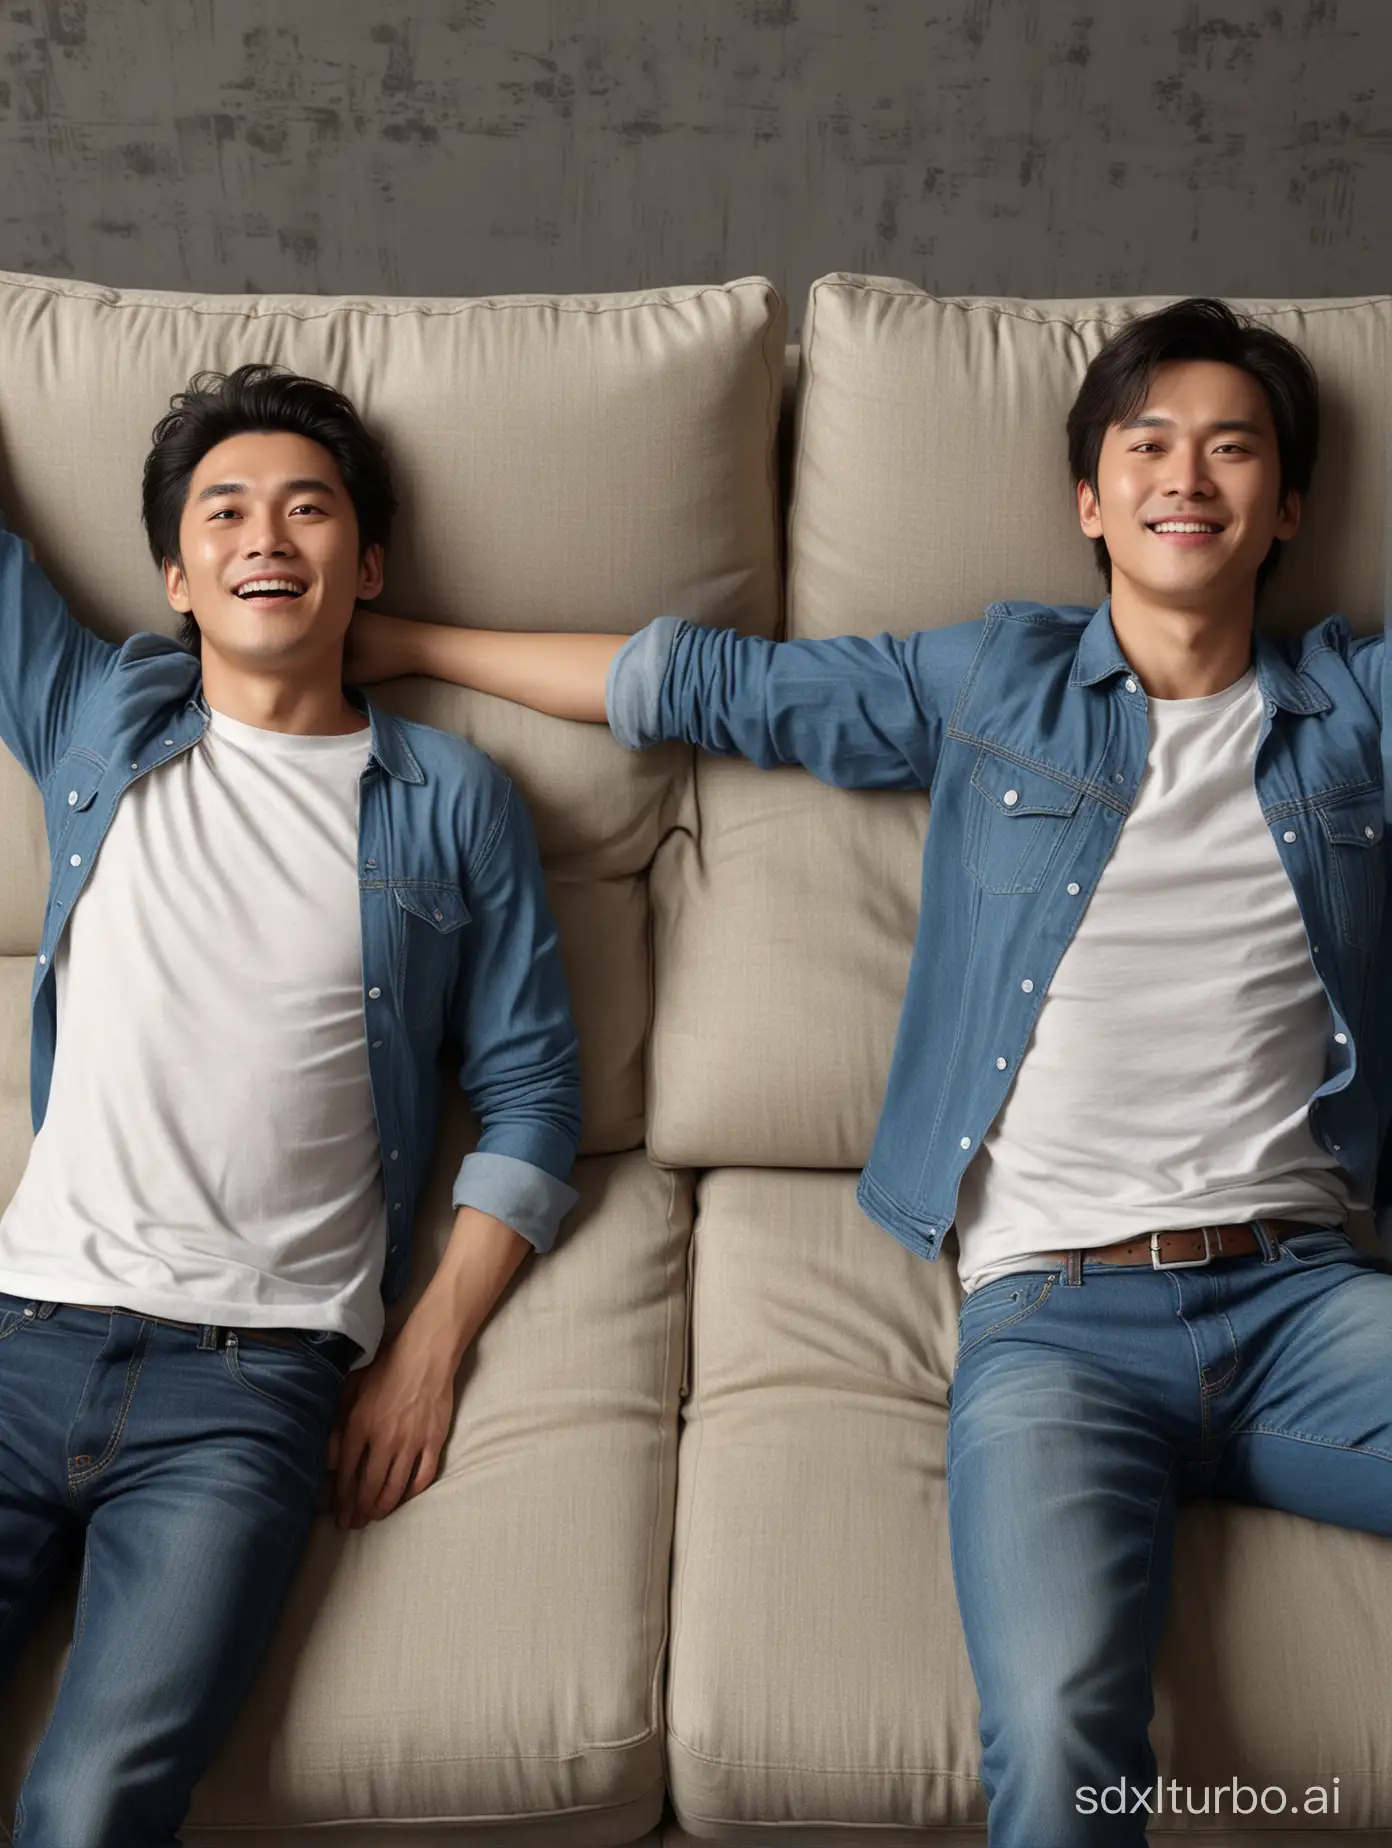 (2 man:1.5),lying on the sofa, side by side, happy, talk, stretch out  hands, stretch out  arms,(30 years :1.2),Asian, star face, upper body Angle, upper body Angle, Side angle of view, extremely detailed background,  Wear jeans,(8k, RAW photo, best quality, masterpiece:1.2), ultra detailed, ultra high res, (realistic, photo realistic:1.37), portrait, high detail RAW color photo, professional photograph, an extremely delicate and beautiful, extremely detailed, 8k wallpaper, Amazing, finely detail, huge file size, official art,  extremely detailed CG unity 8k wallpaper